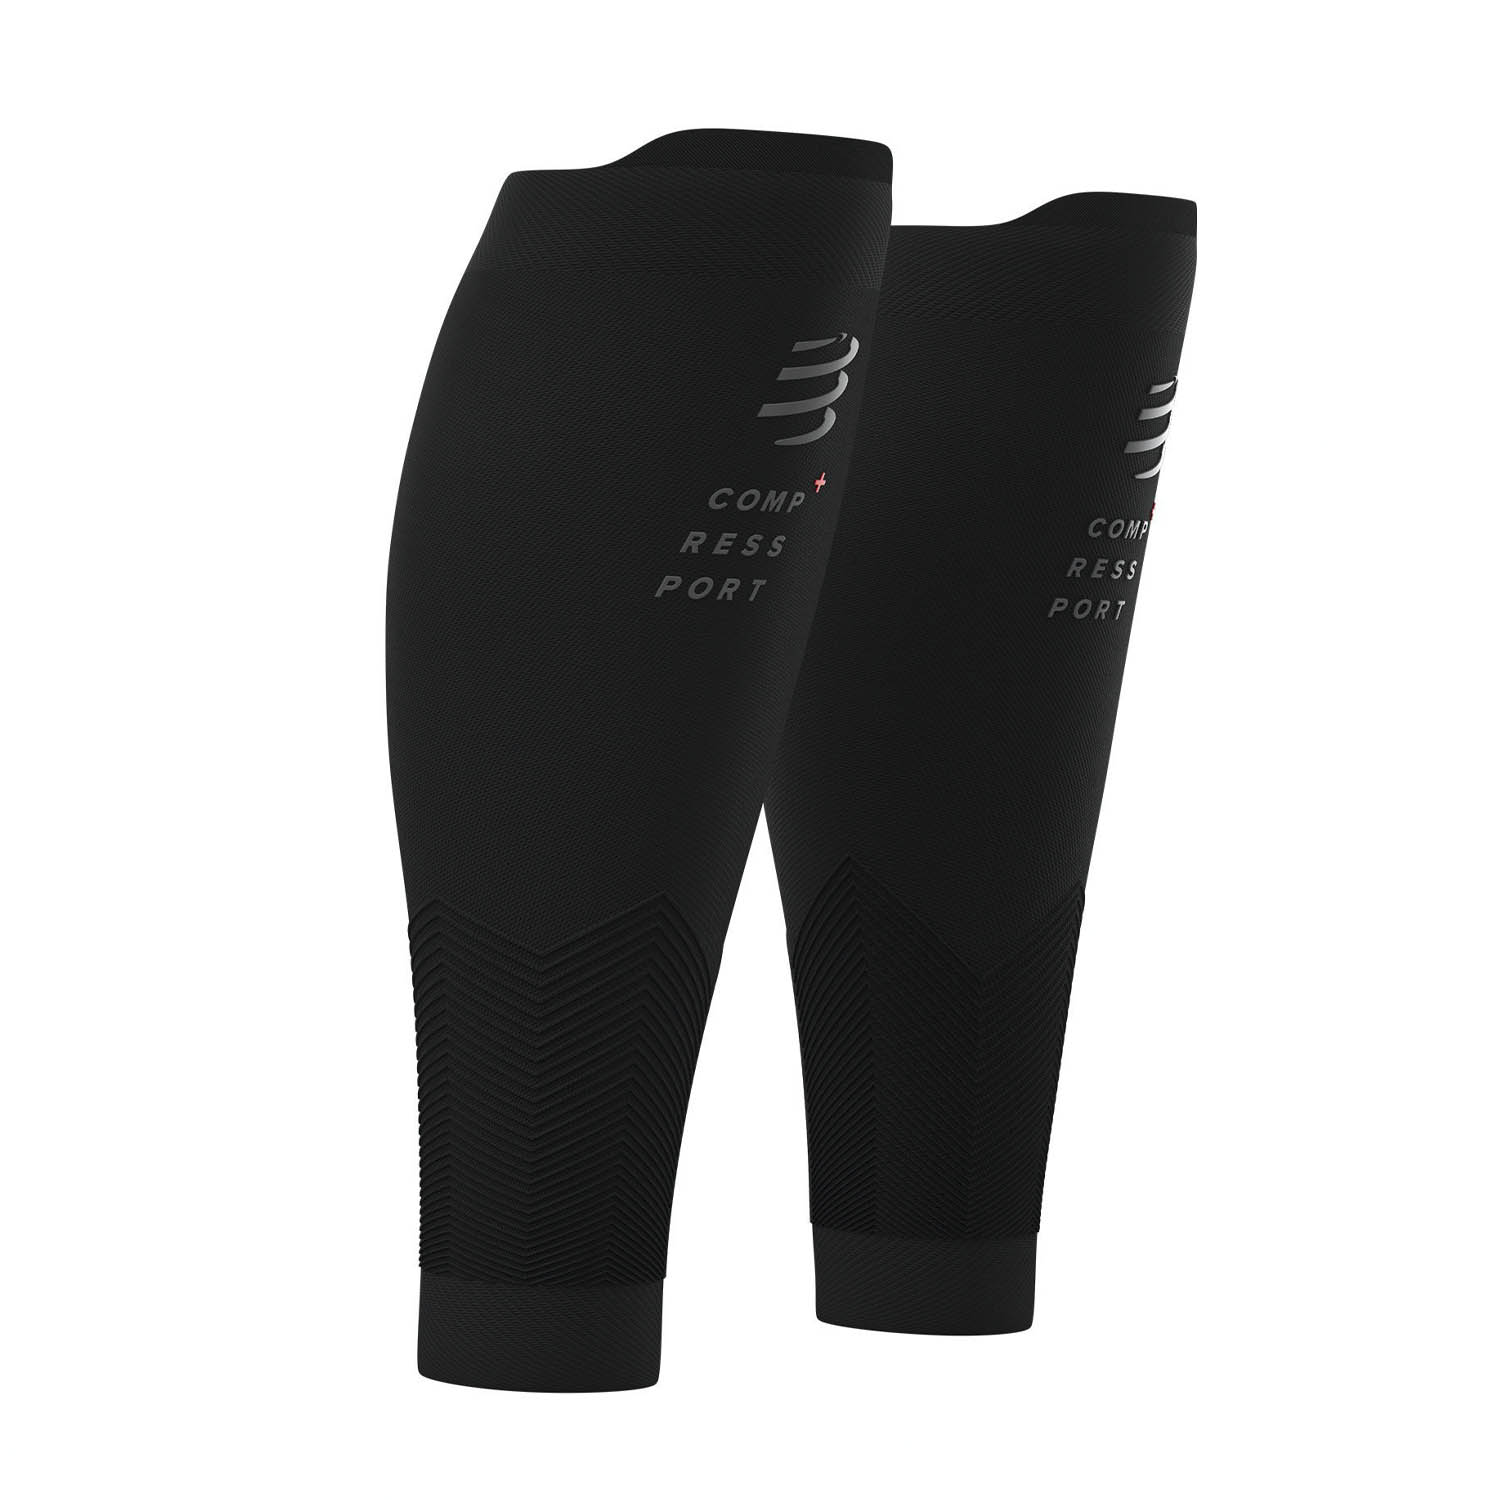 nike compression sleeves for calves,www.syncro-system.bg